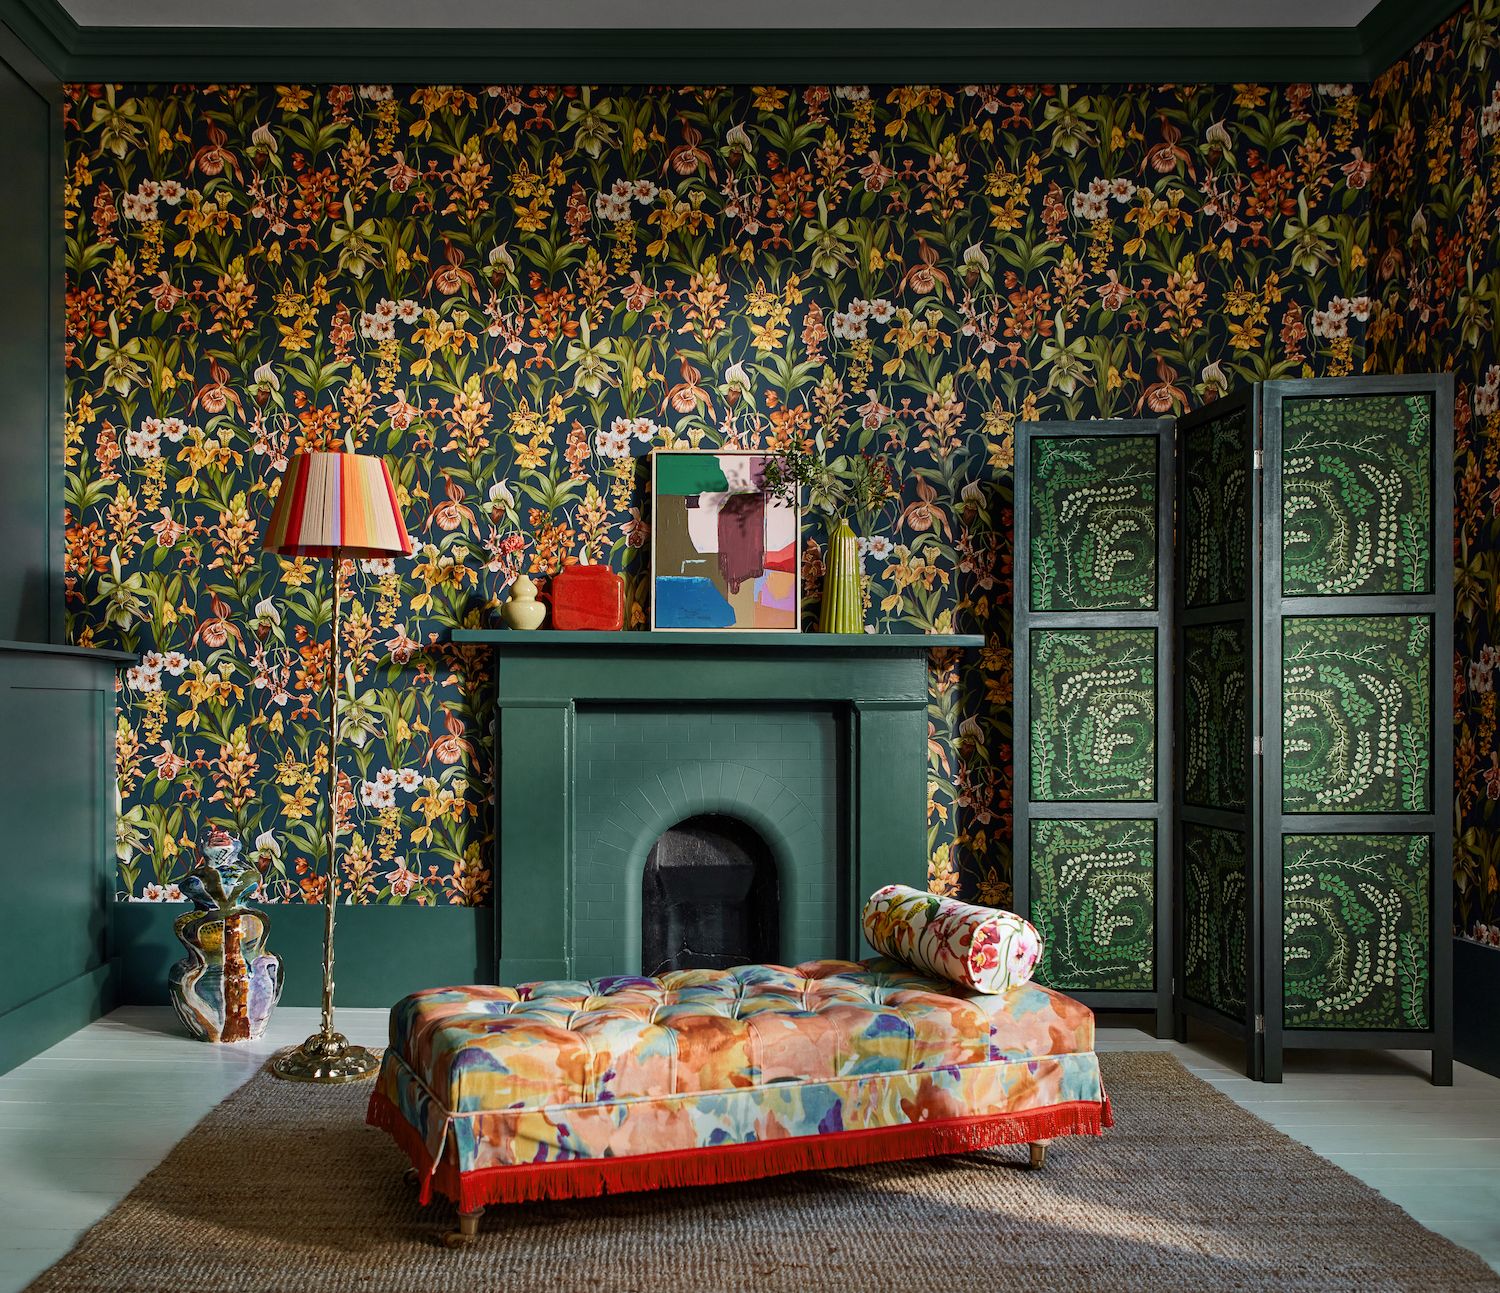 House of Hackneyinspired wallpapers to buy now